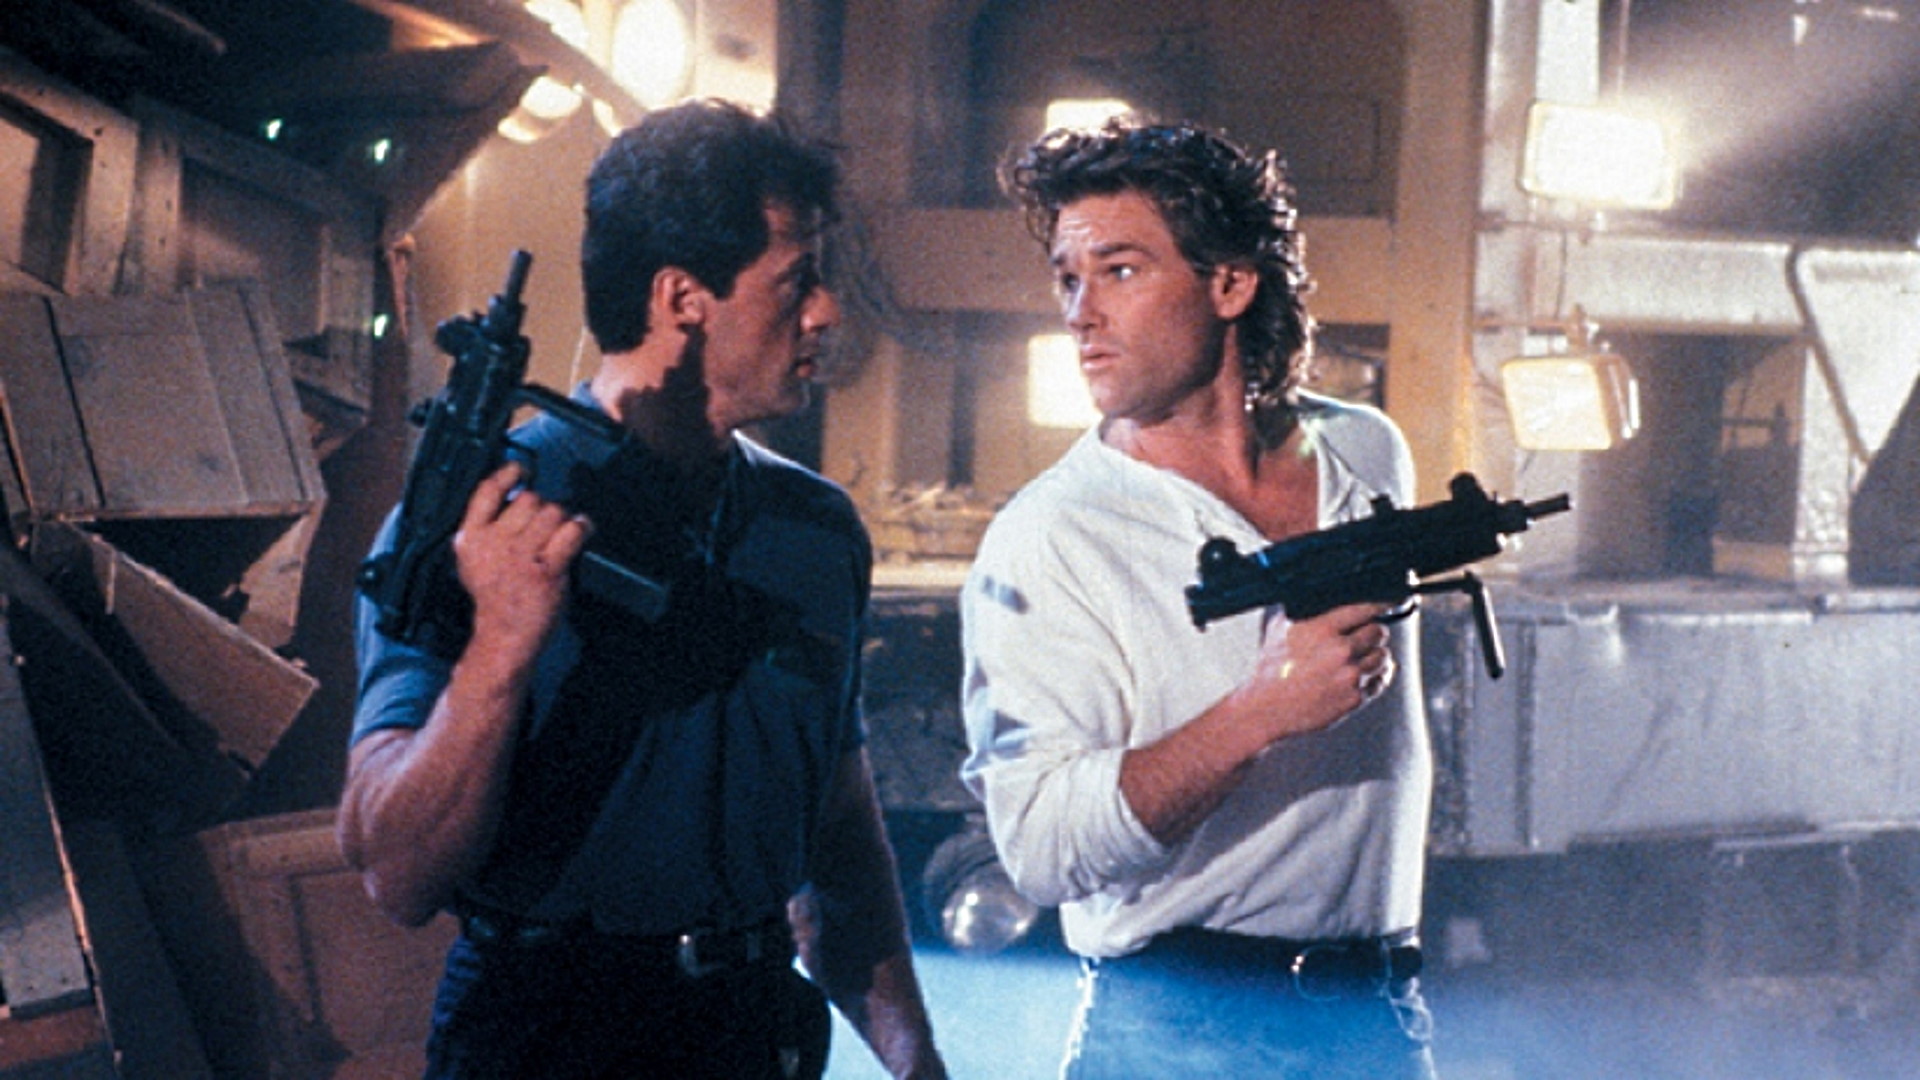 Tango And Cash Vern S Reviews On The Films Of Cinema